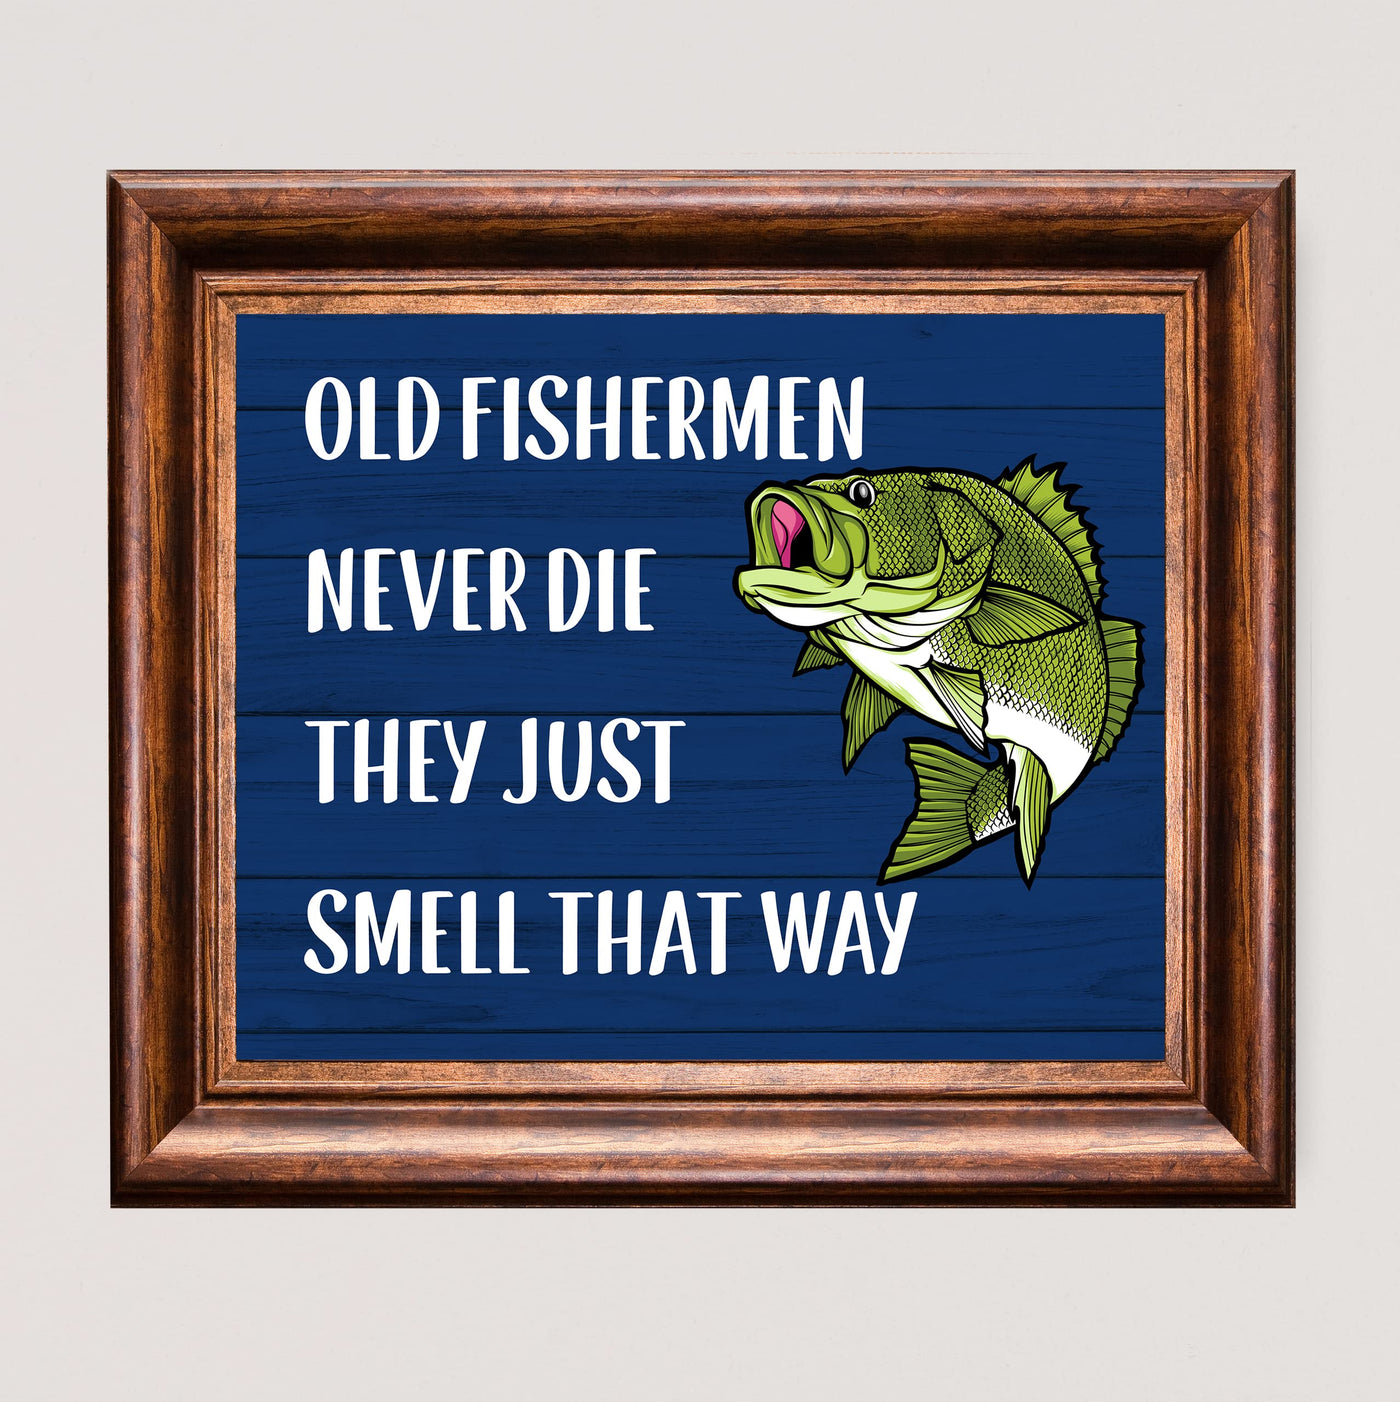 Old Fishermen Never Die-Just Smell That Way-Funny Fishing Wall Sign -10 x 8" Rustic Art Print w/Green Bass Fish Image -Ready to Frame. Home-Cabin-Lodge-Lake House Decor. Printed on Photo Paper.